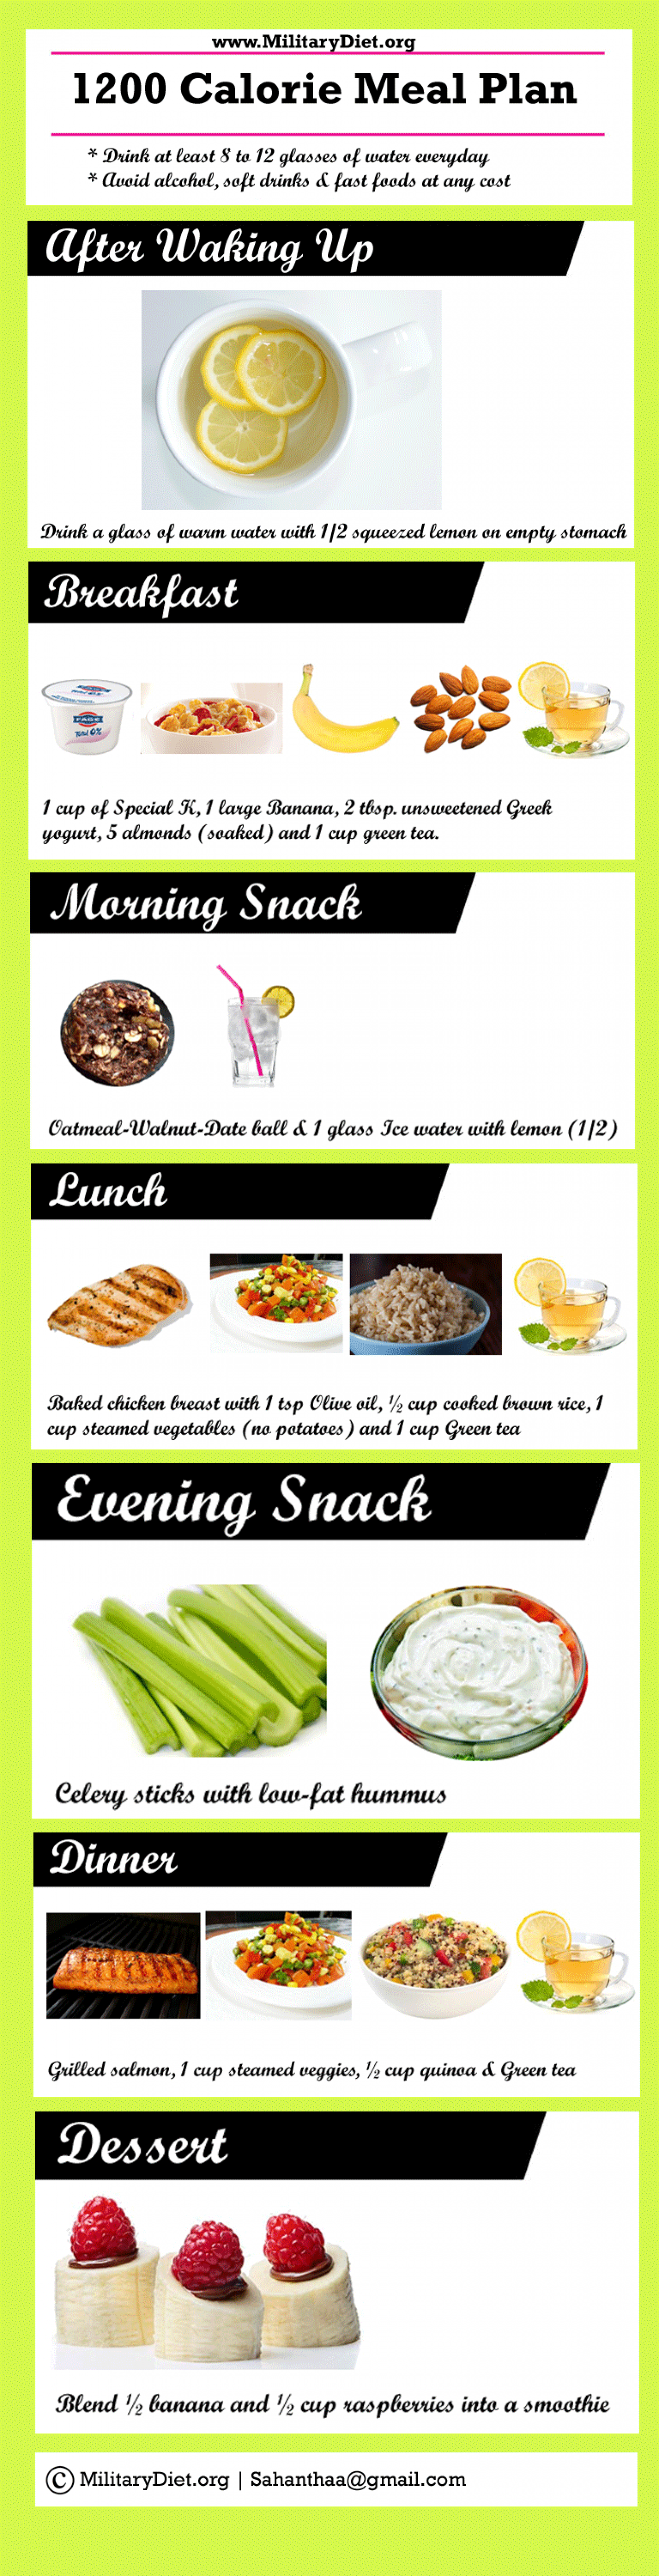 1200 Calorie Meal Plan for Weight Loss Infographic